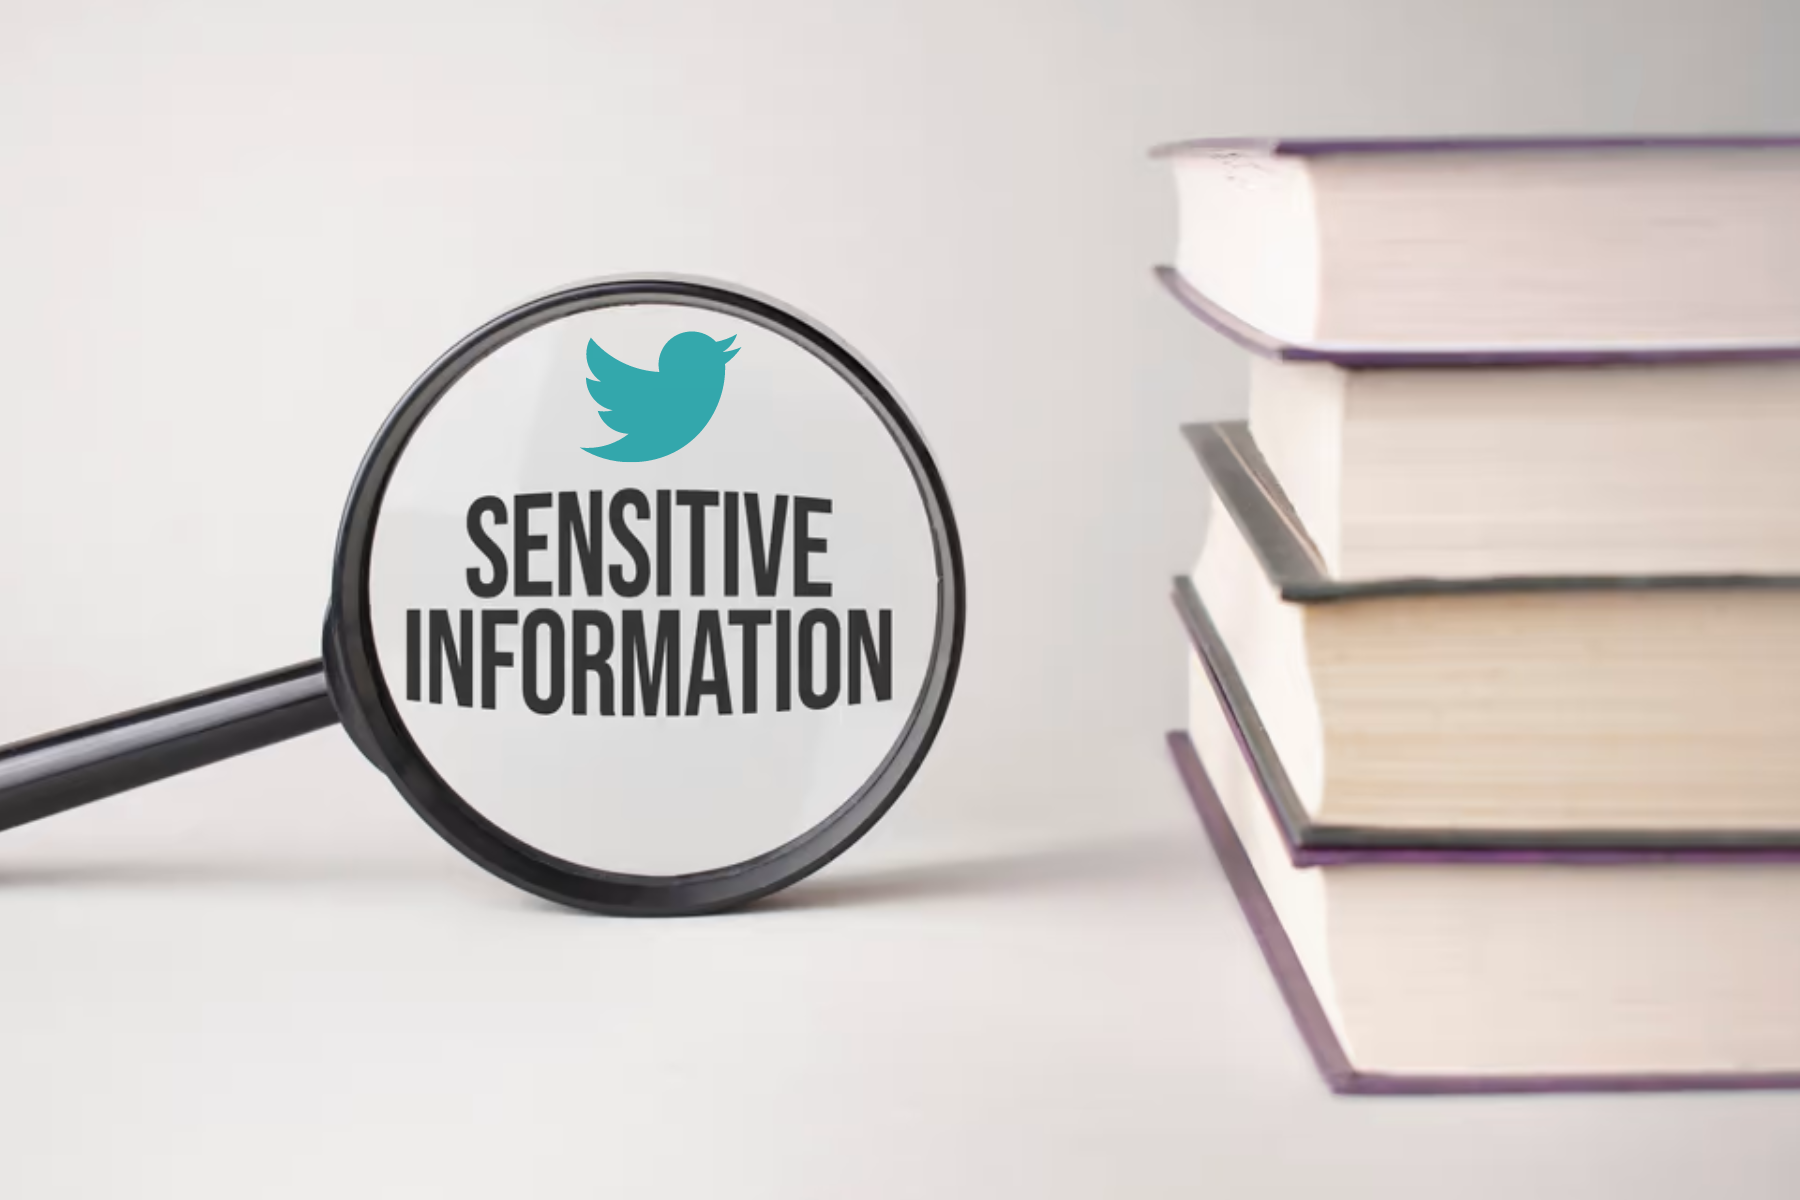 Along with the books, a magnifying glass was focused on the Twitter logo and the words "Sensitive Information"